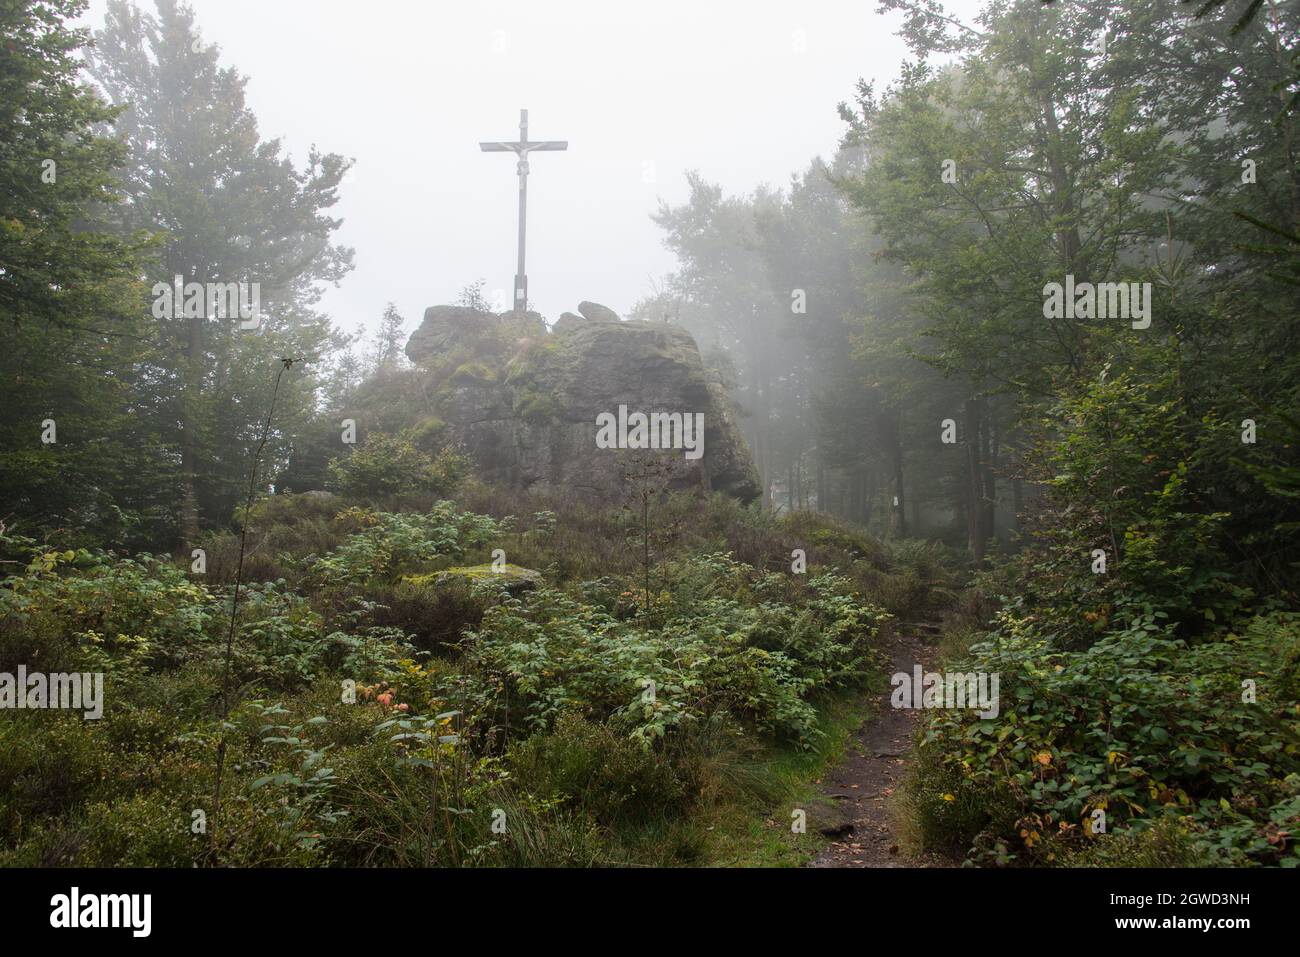 Summit cross at Goldsteig hiking trail in the misty forest of Northern Bavaria. Stock Photo